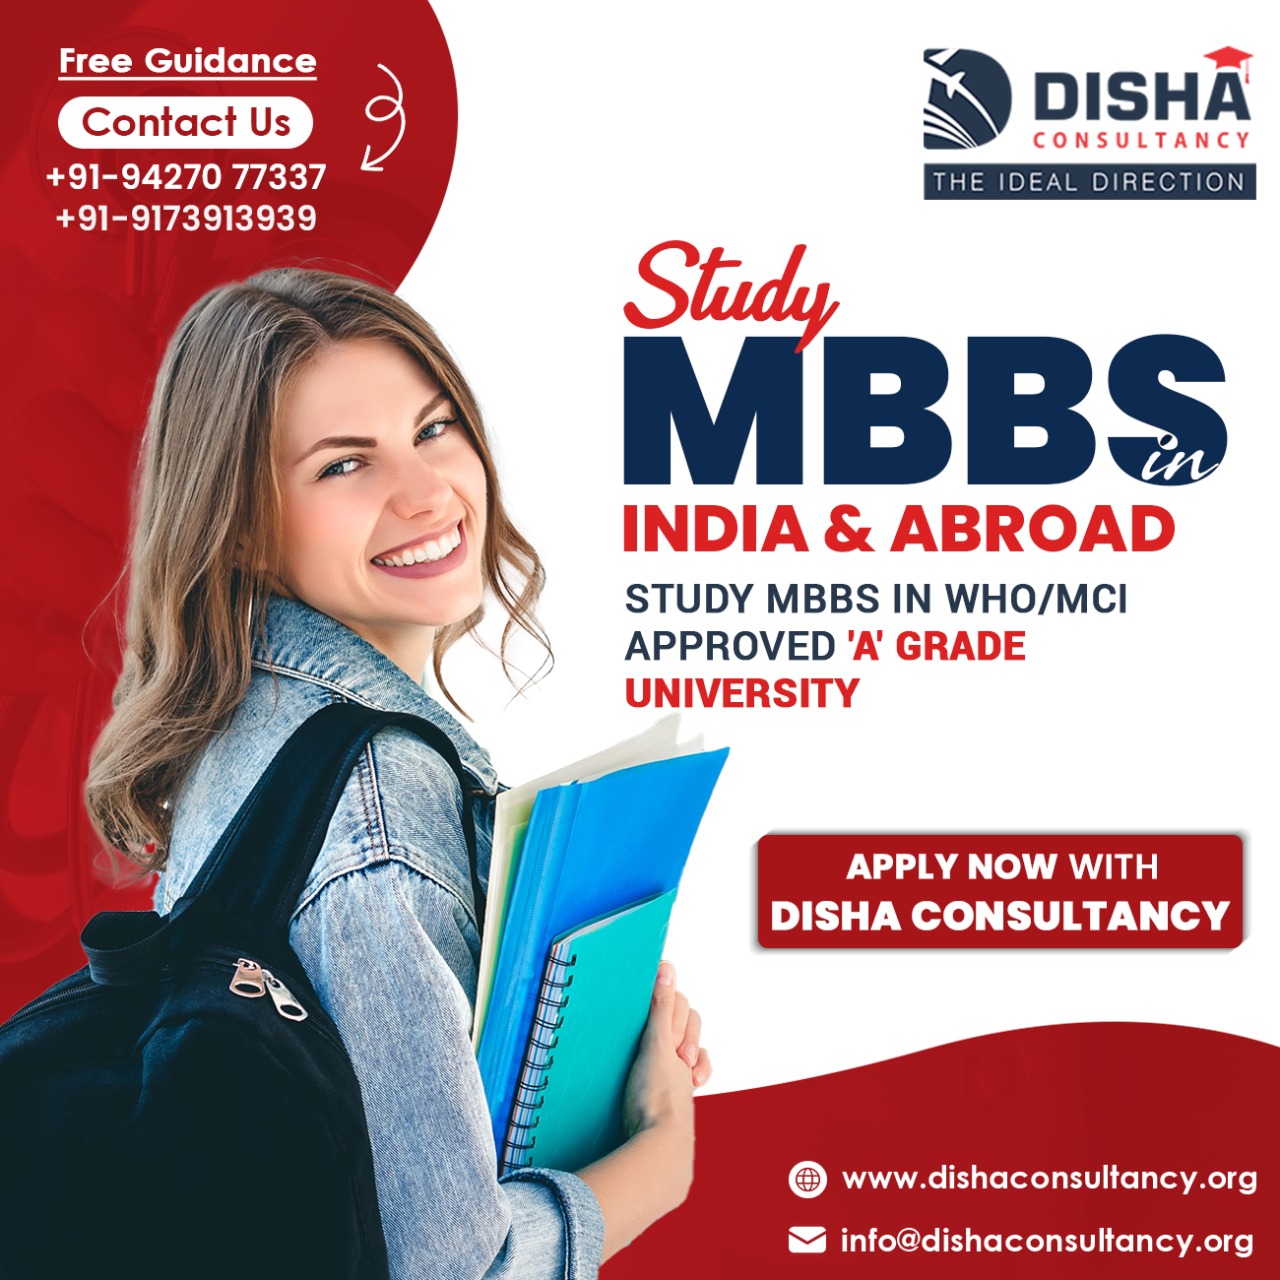 Free Guidance D I S HA
Contact Us J CONSULTANCY
+91-94270 77337

+91-9173913939

i MBBS

INDIA & ABROAD

STUDY MBBS IN WHO/MCI
APPROVED 'A' GRADE
UNIVERSITY

APPLY NOW WITH
DISHA CONSULTANCY

         
   
 
      

  

THE IDEAL DIRECTION

(©) www.dishaconsultancy.org

   

©% info@dishaconsultancy.org